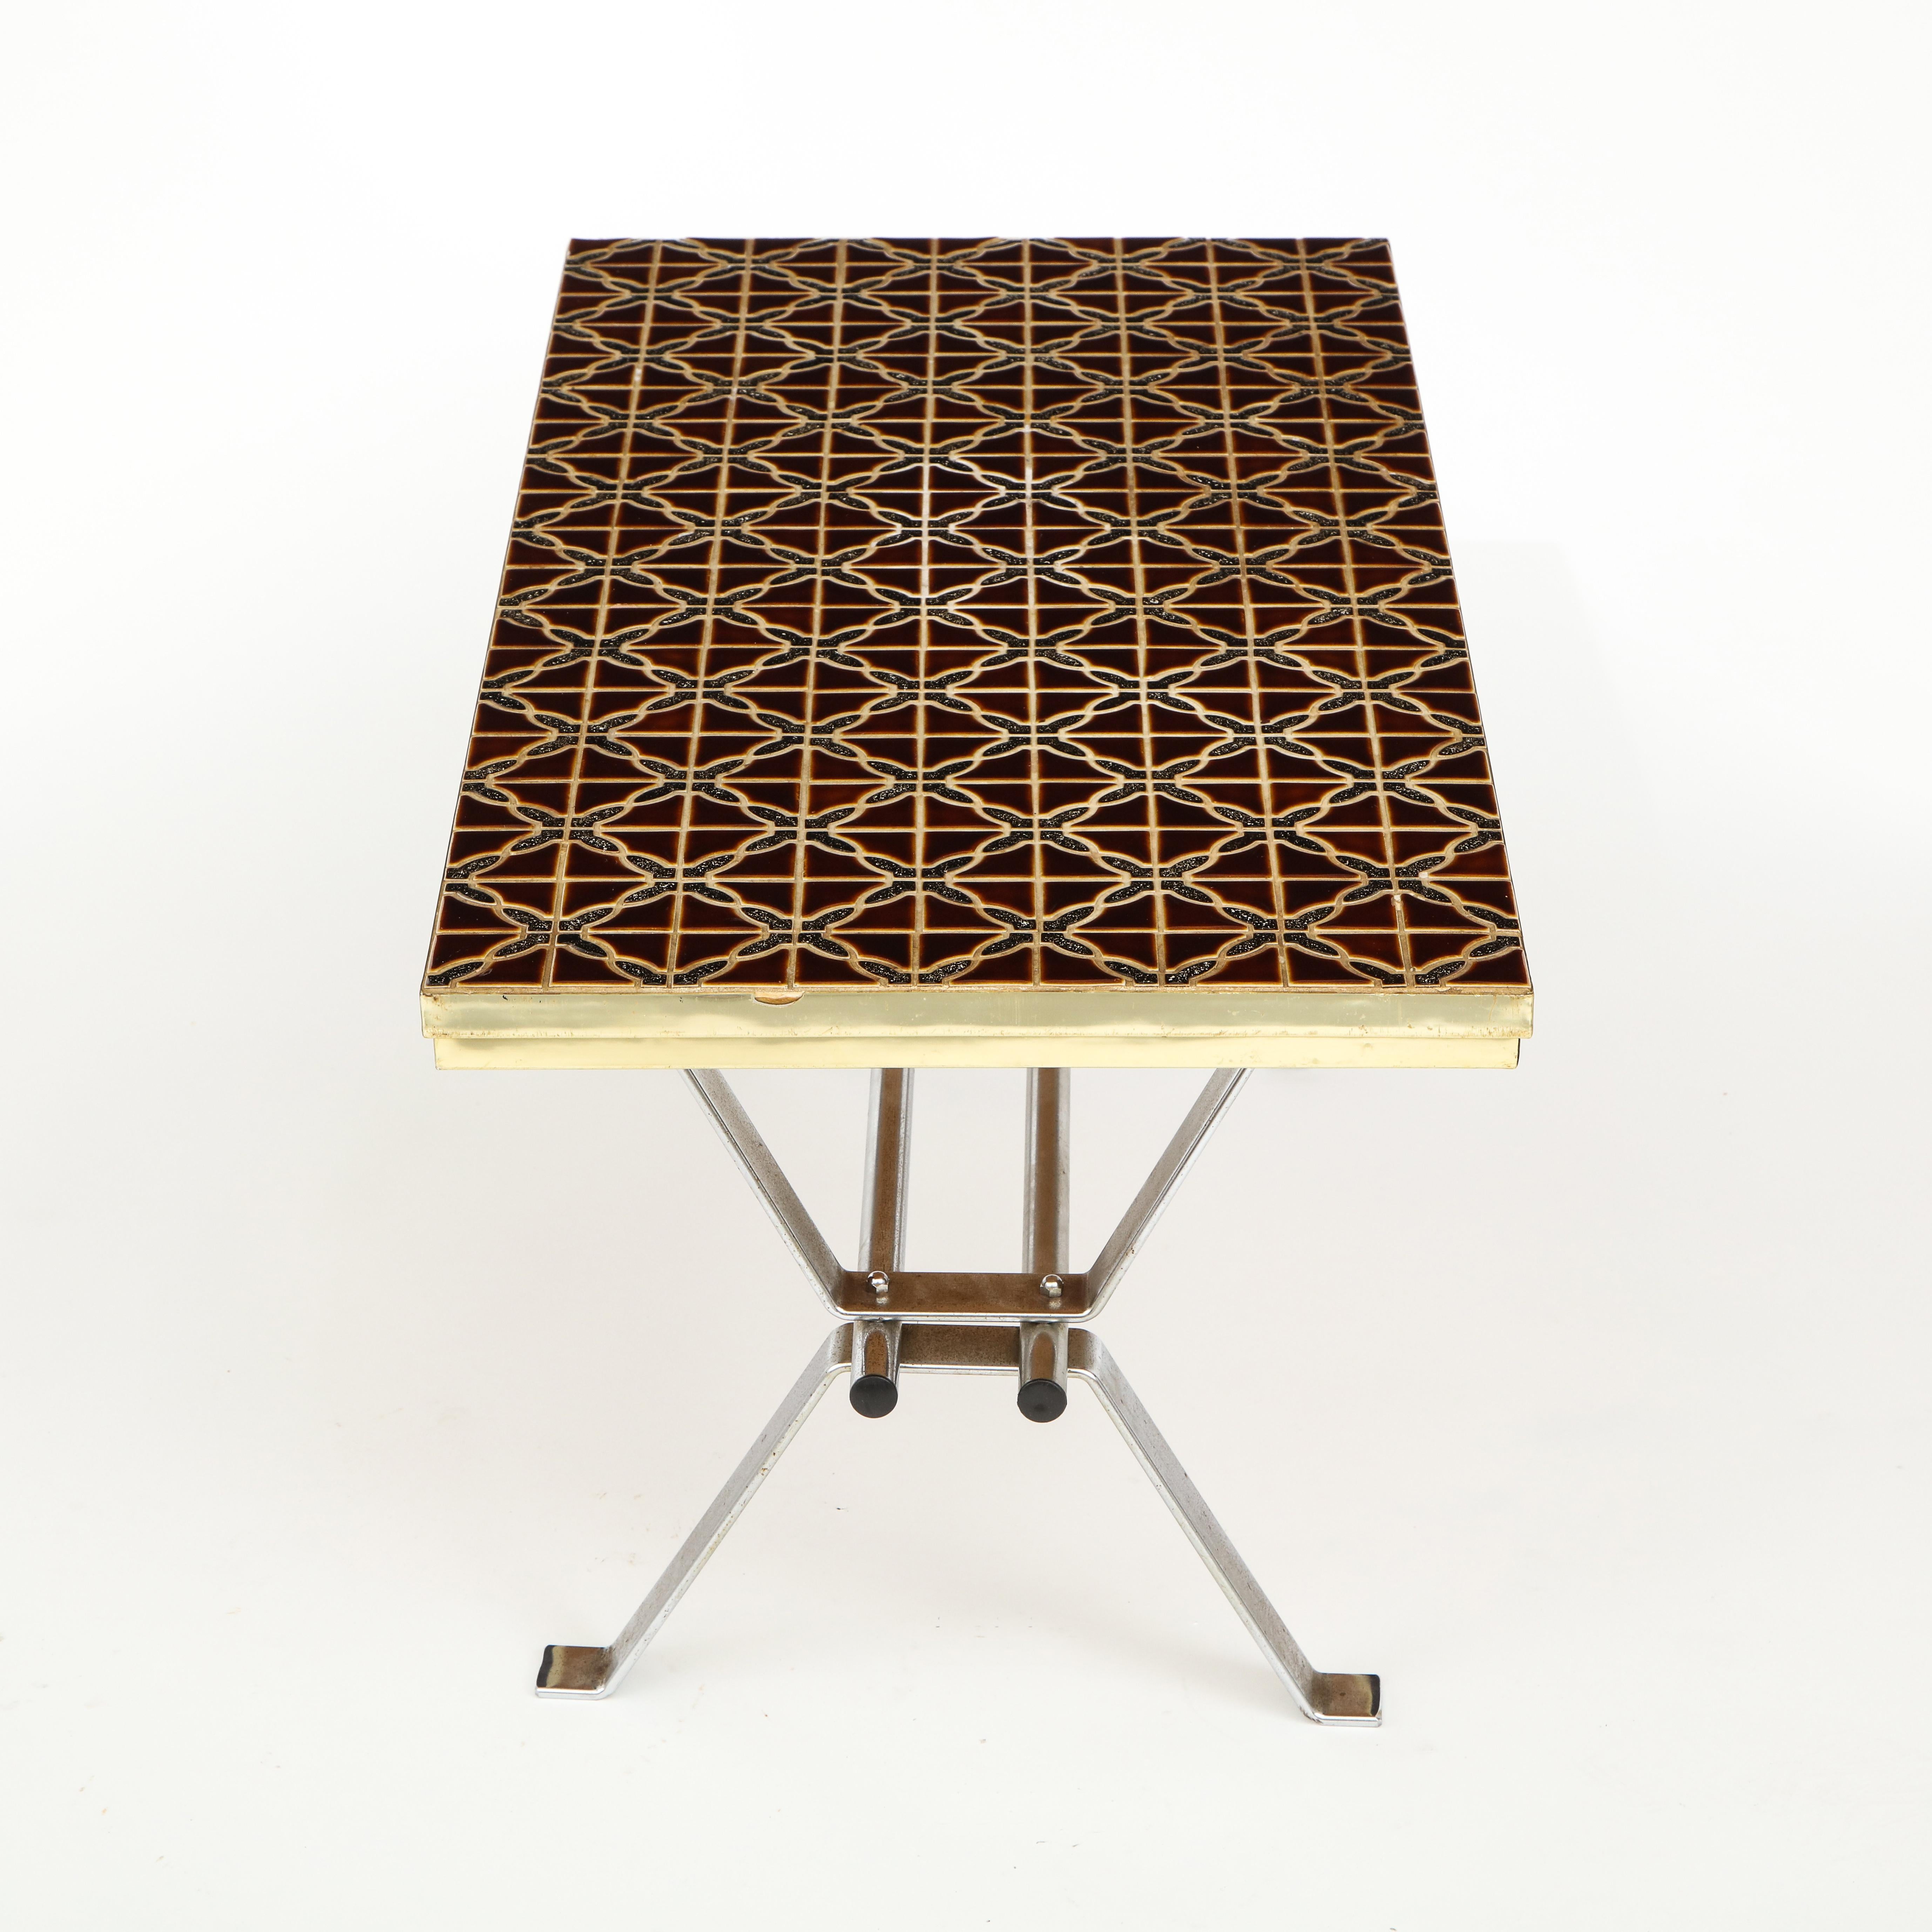 Mid-20th Century Mixed Metal and Tile Mosaic Vintage Coffee Table